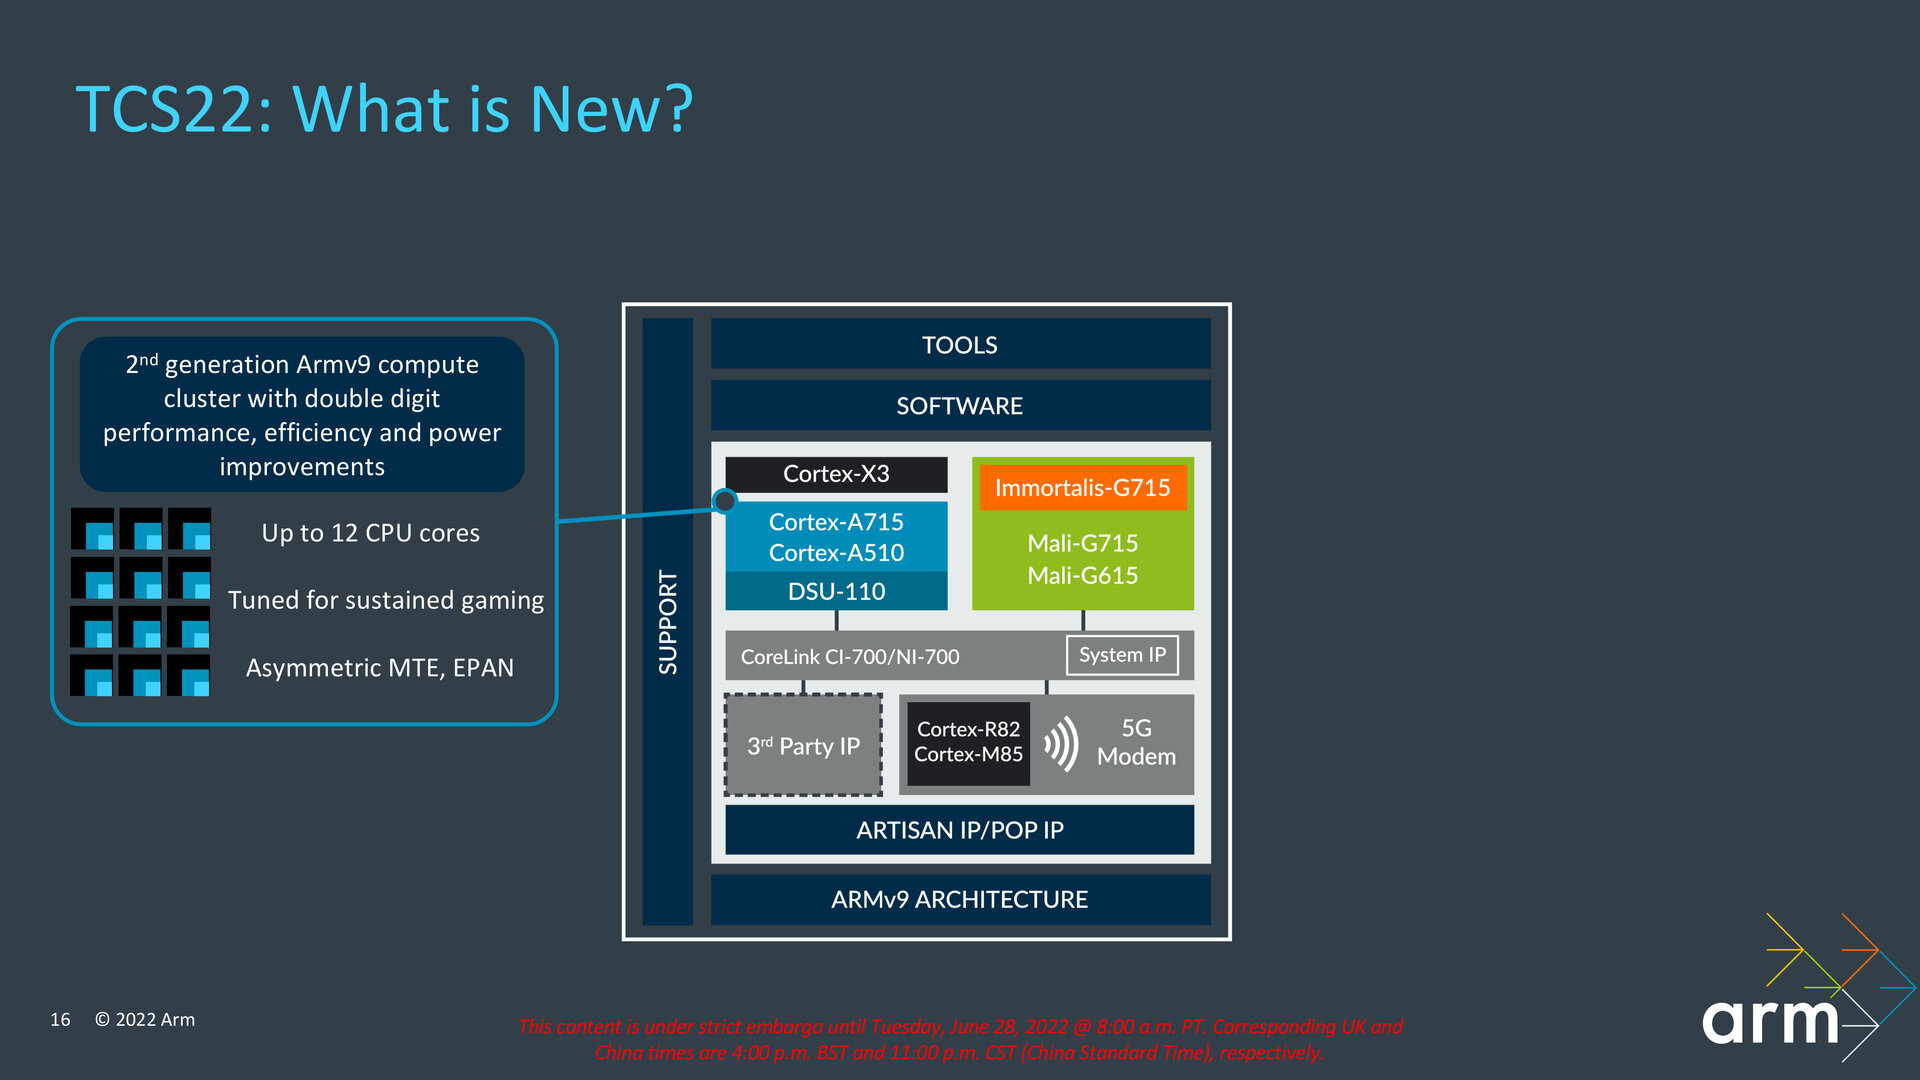 The 2nd generation ARMv9 cores are coming